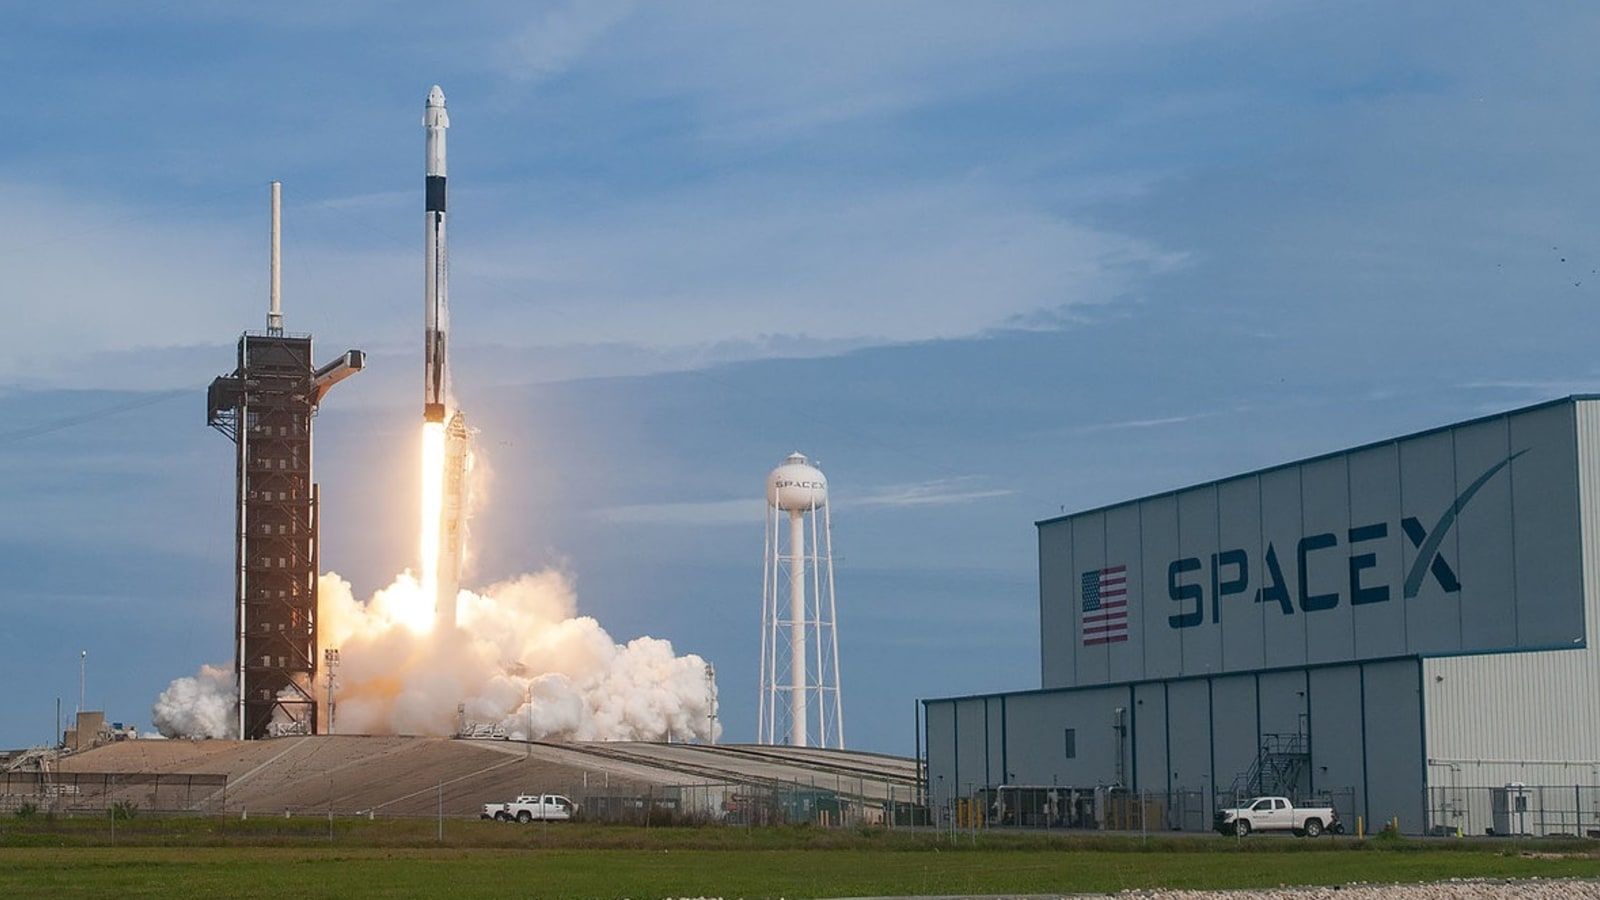 SpaceX is chasing a $36 billion valuation